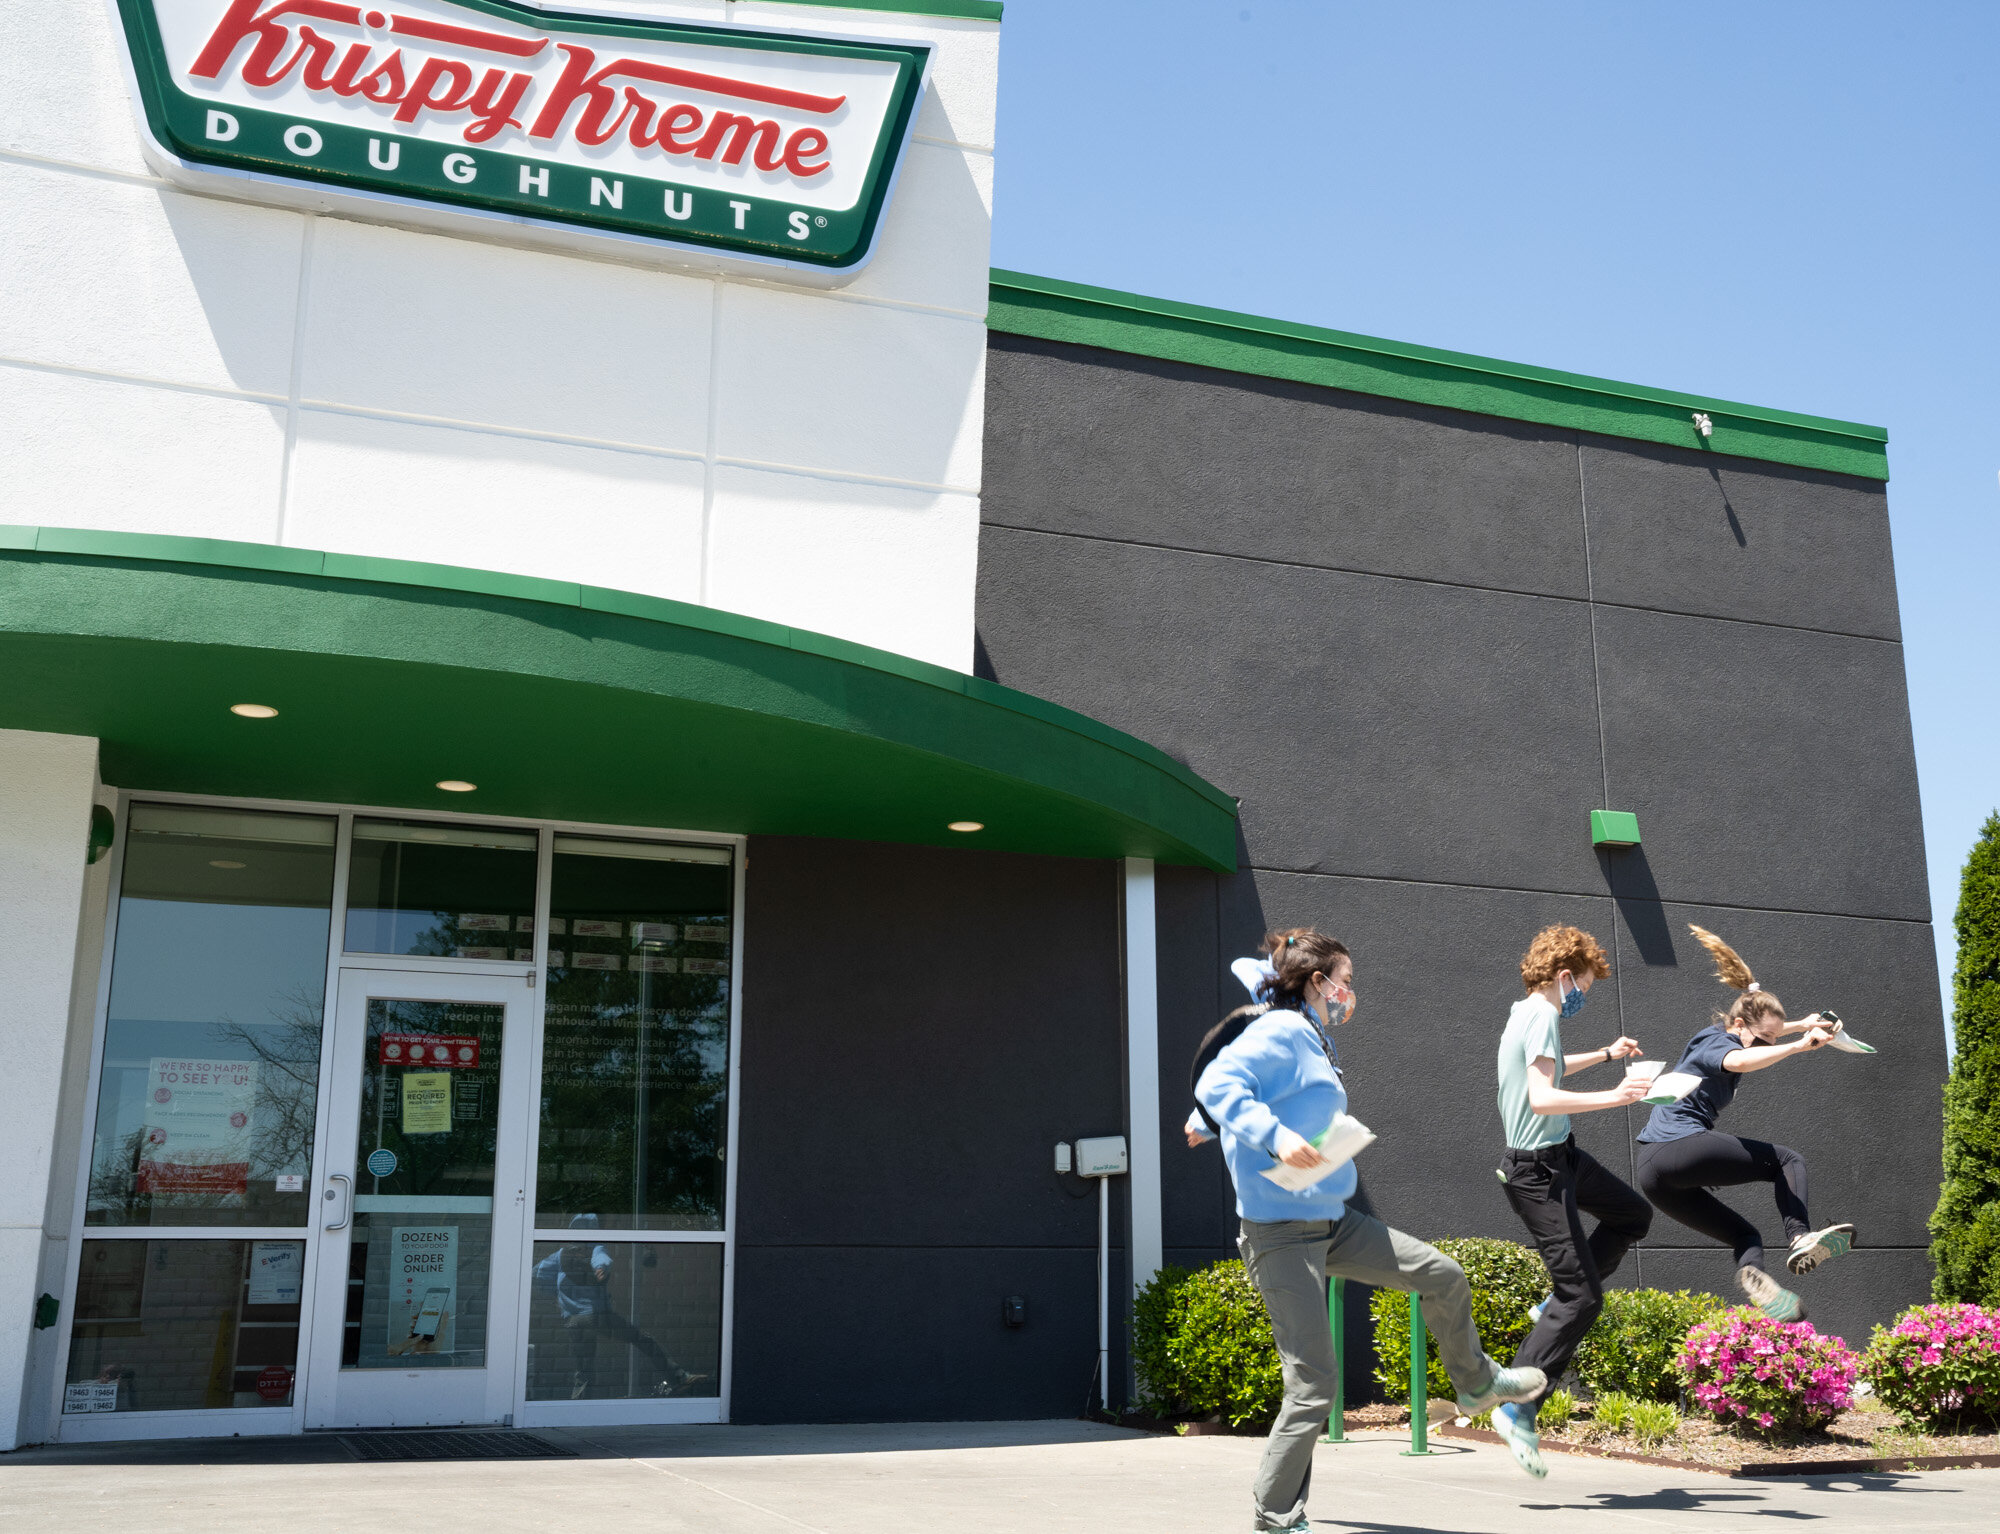  For a boost in morale, Farquhar and her fellow researchers decided to cash in their free vaccine donuts at Krispy Kreme, something they'd been trying to squeeze in between field work sites for weeks. 